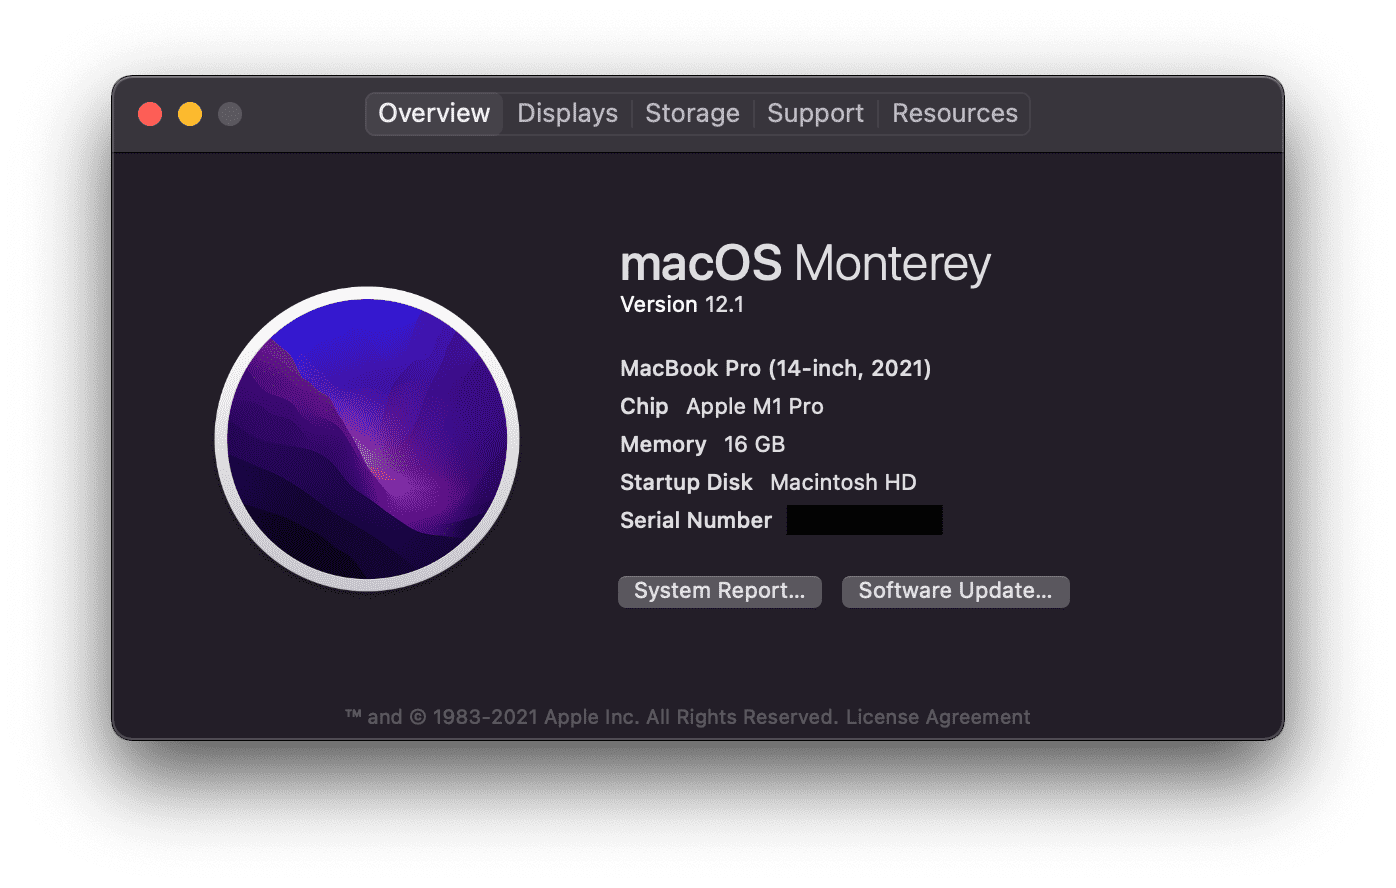 About this Mac.